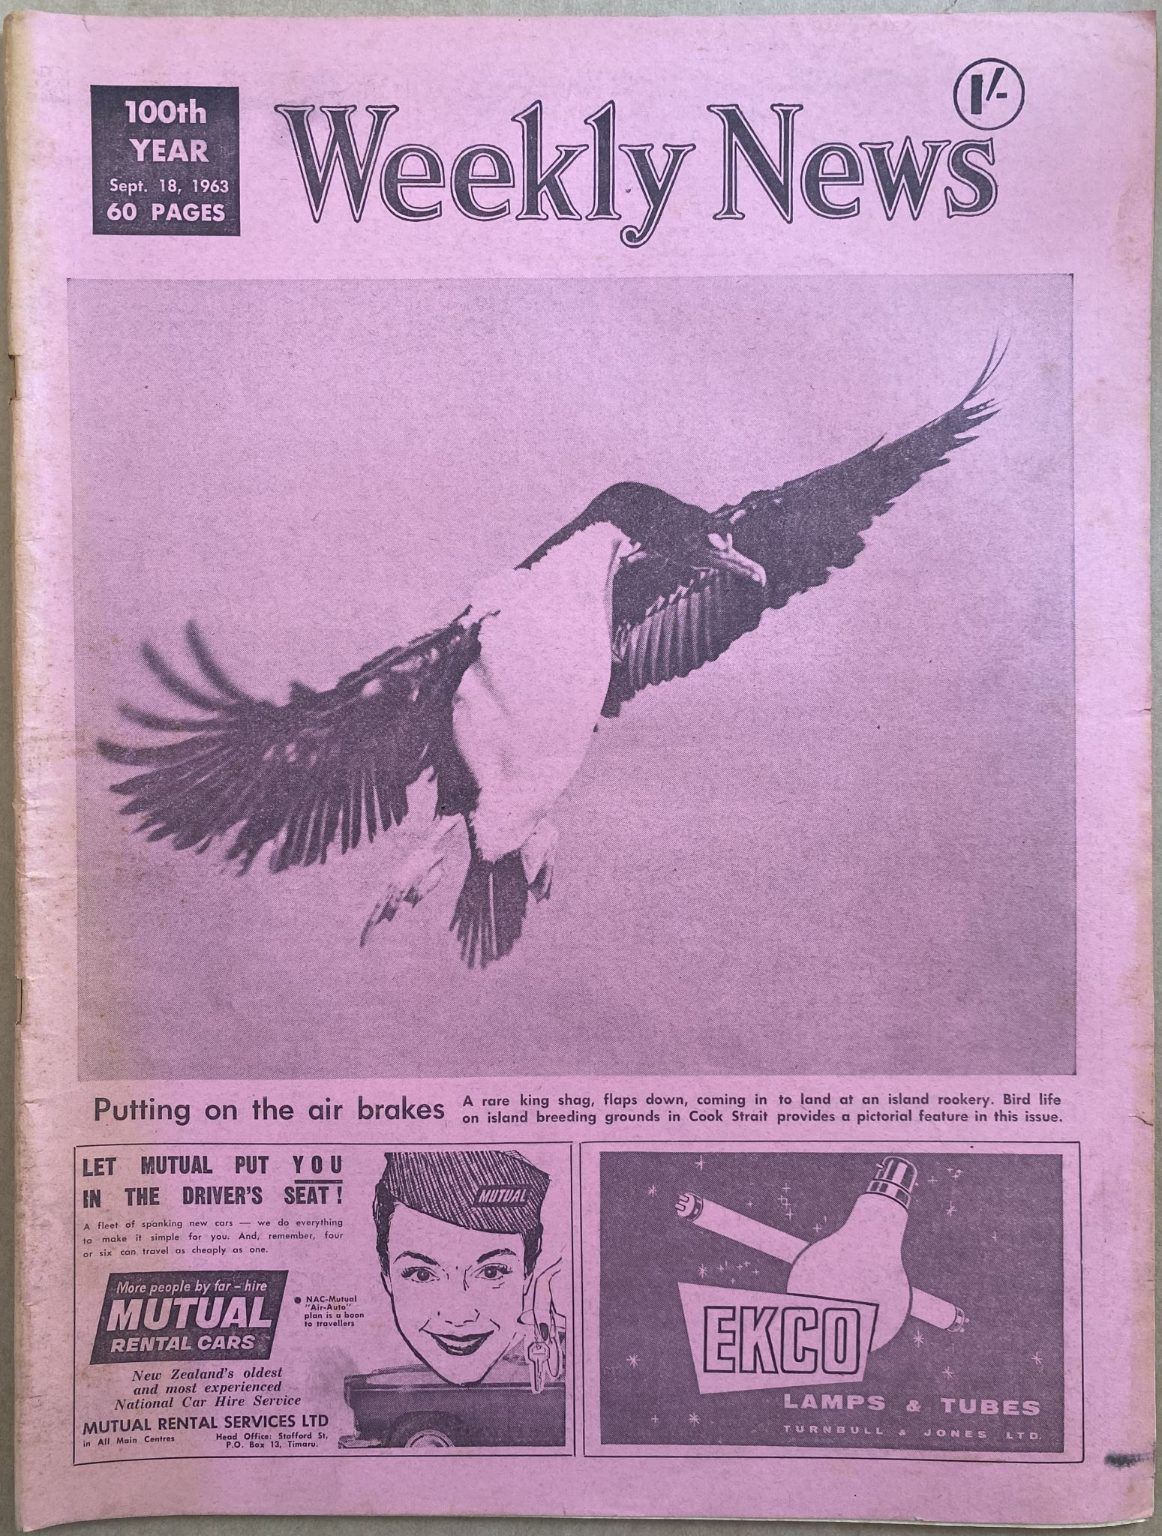 OLD NEWSPAPER: The Weekly News, No. 5208, 18 September 1963